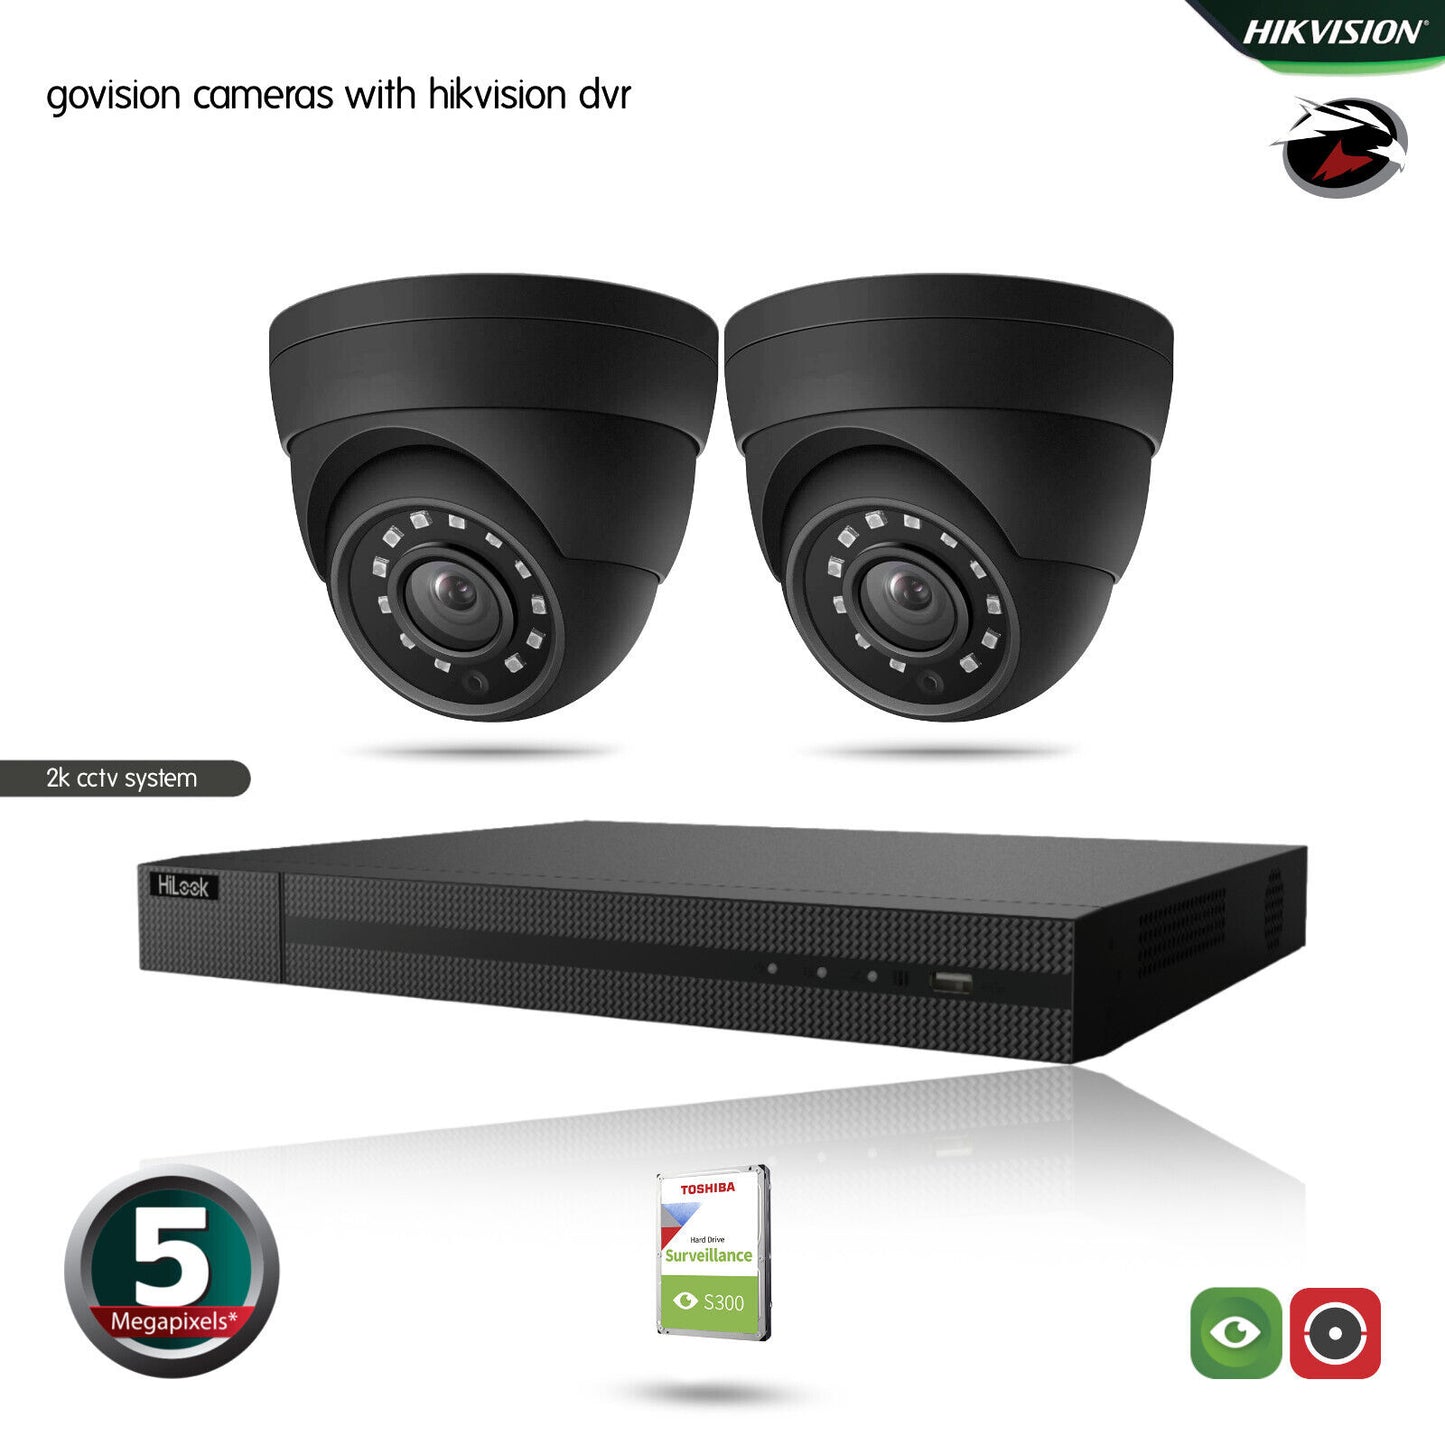 Hikvision 5MP CCTV full HD night vision outdoor DVR home security system kit UK 4ch DVR 2xCameras (gray) 1TB HDD